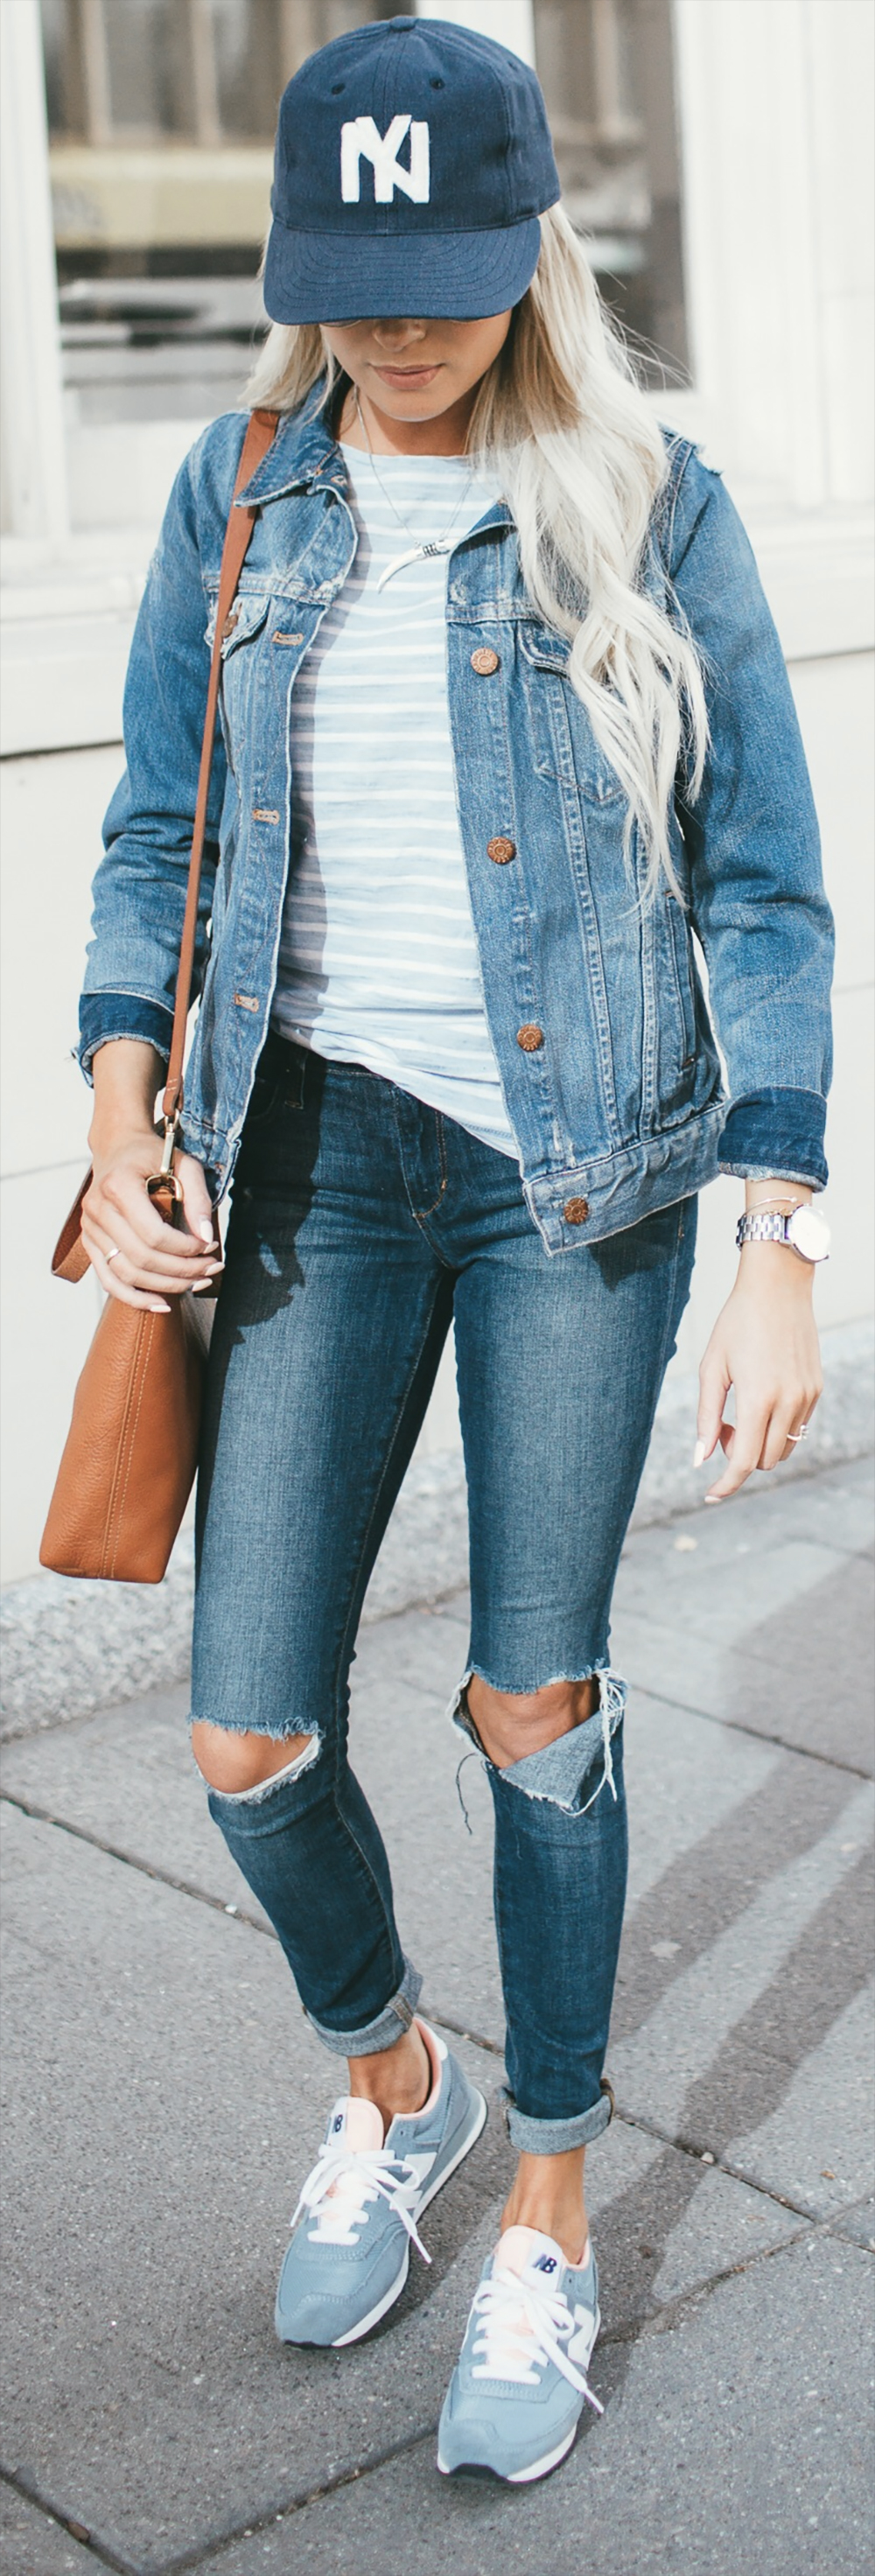 jeans outfit